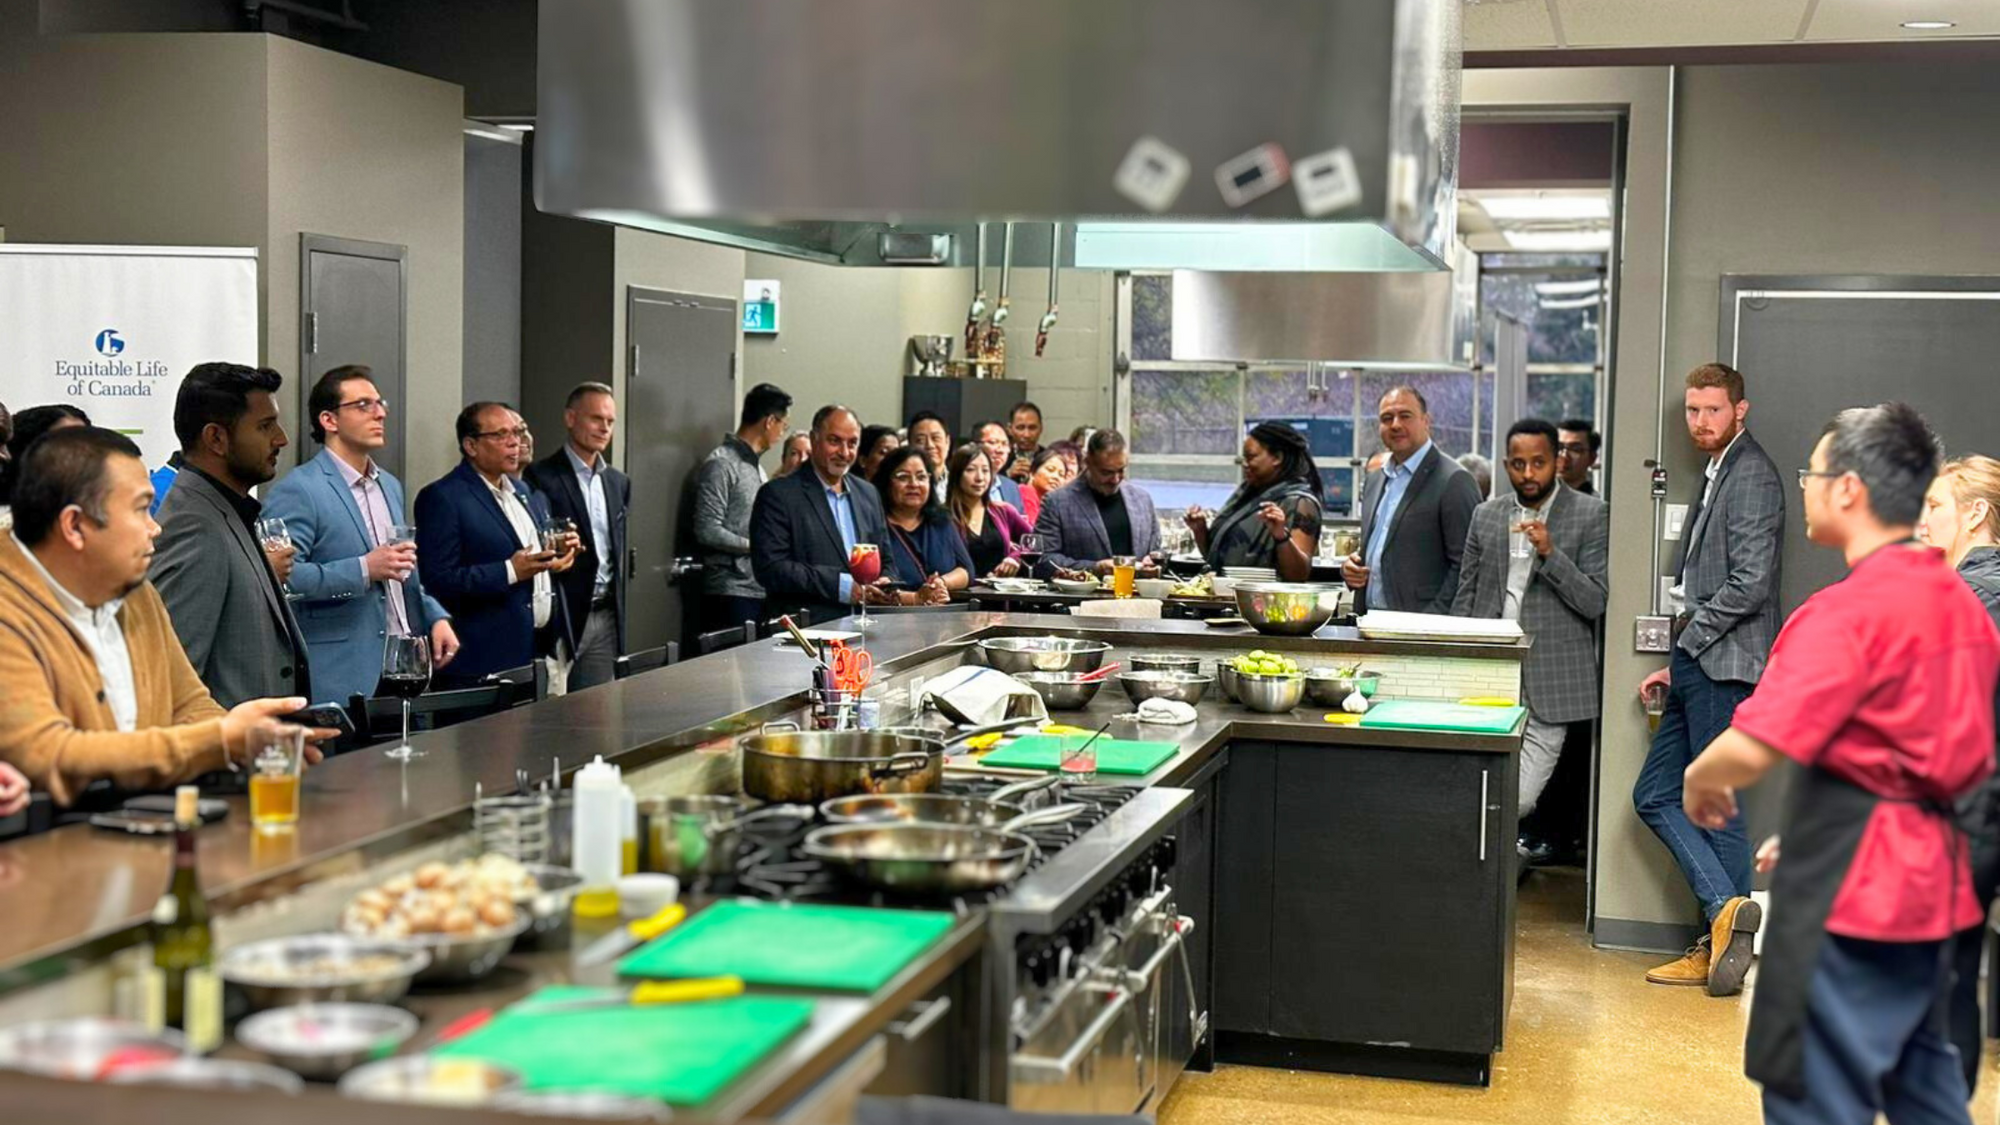 Unleash Teamwork & Laughter: 8 Reasons to Host a Company Cooking Party in Toronto/GTA